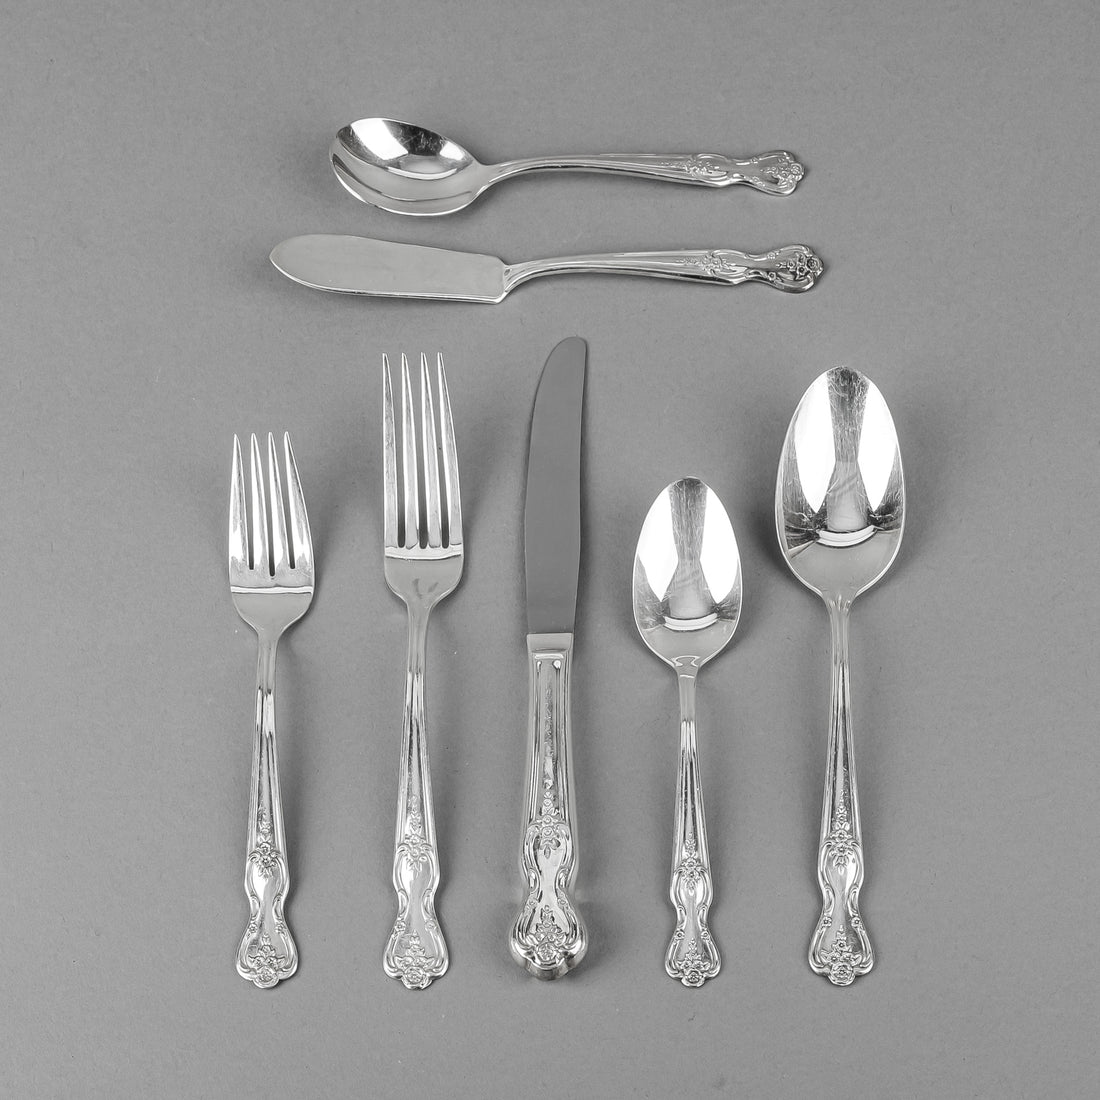 ROGERS & BRO. Magnolia Silver Plate Flatware 12 Place Settings w/Extras